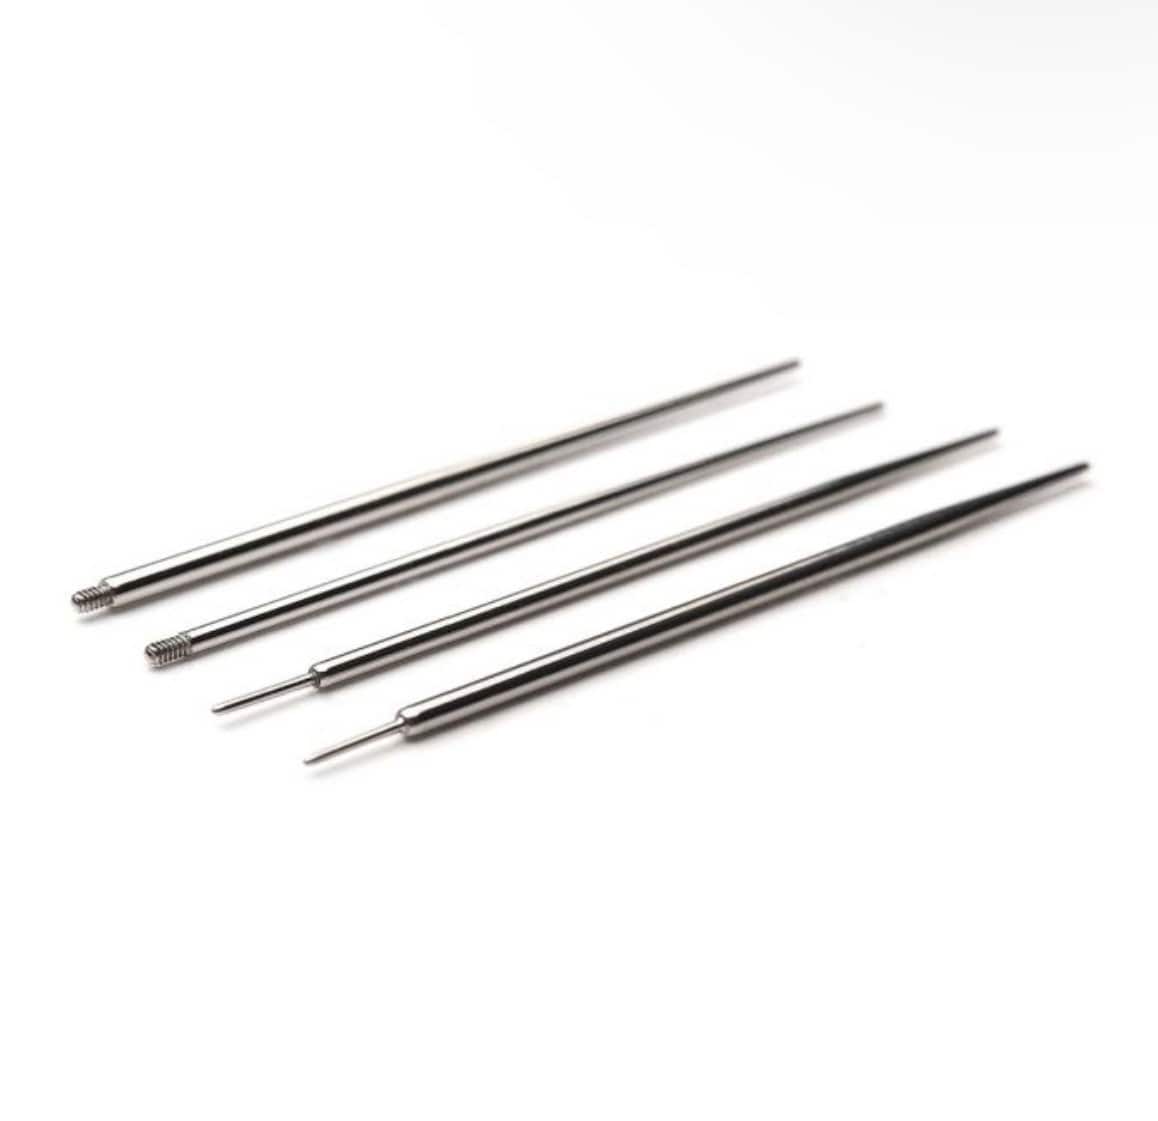 Insertion Pins for at Home Jewelry Changes | Piercing Tools | Piercing Tapers | Body Jewelry Tools | Taper